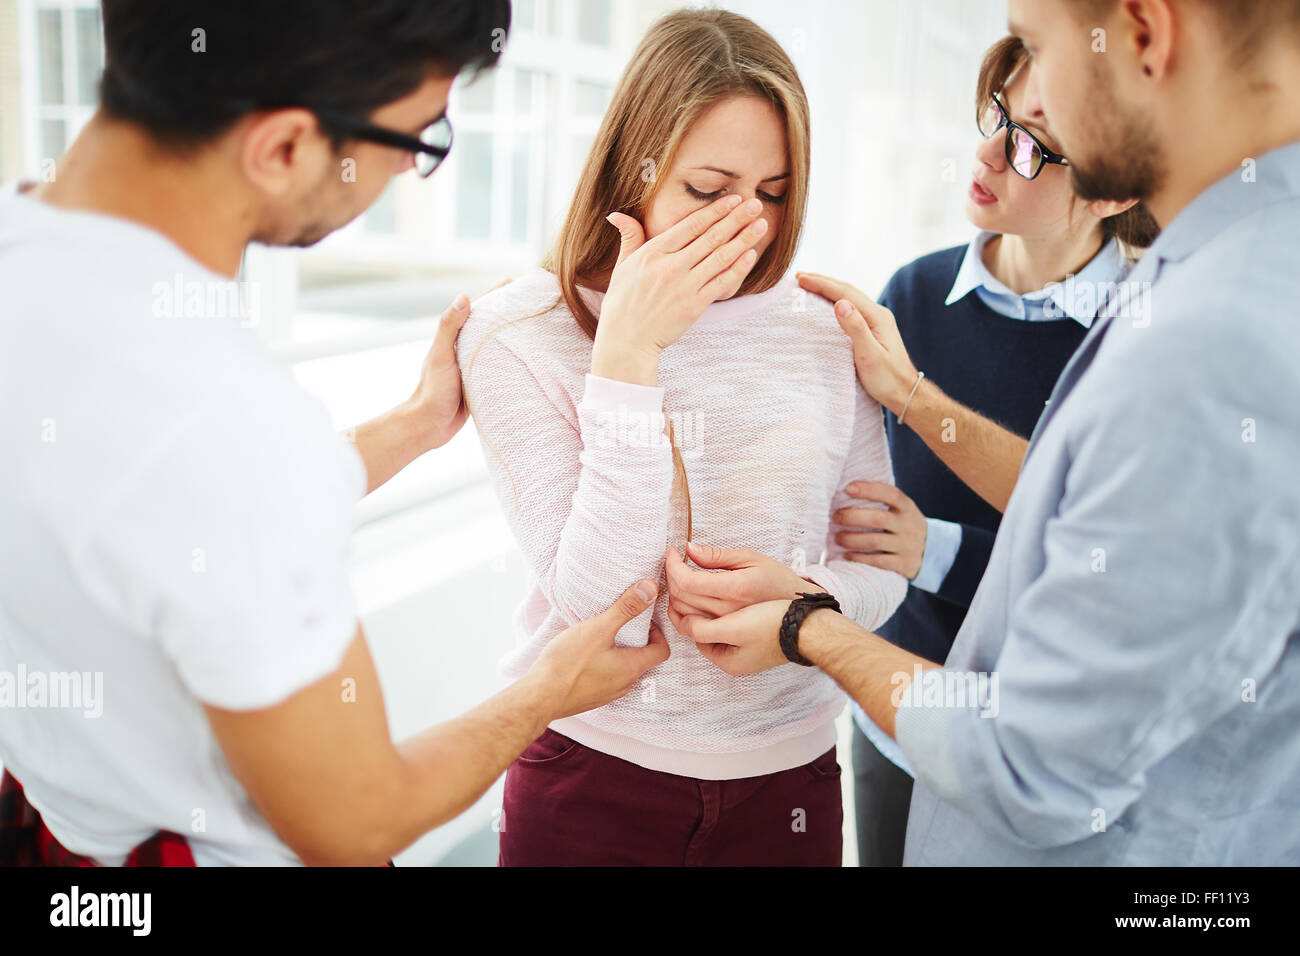 Group of students supporting their crying friend Stock Photo